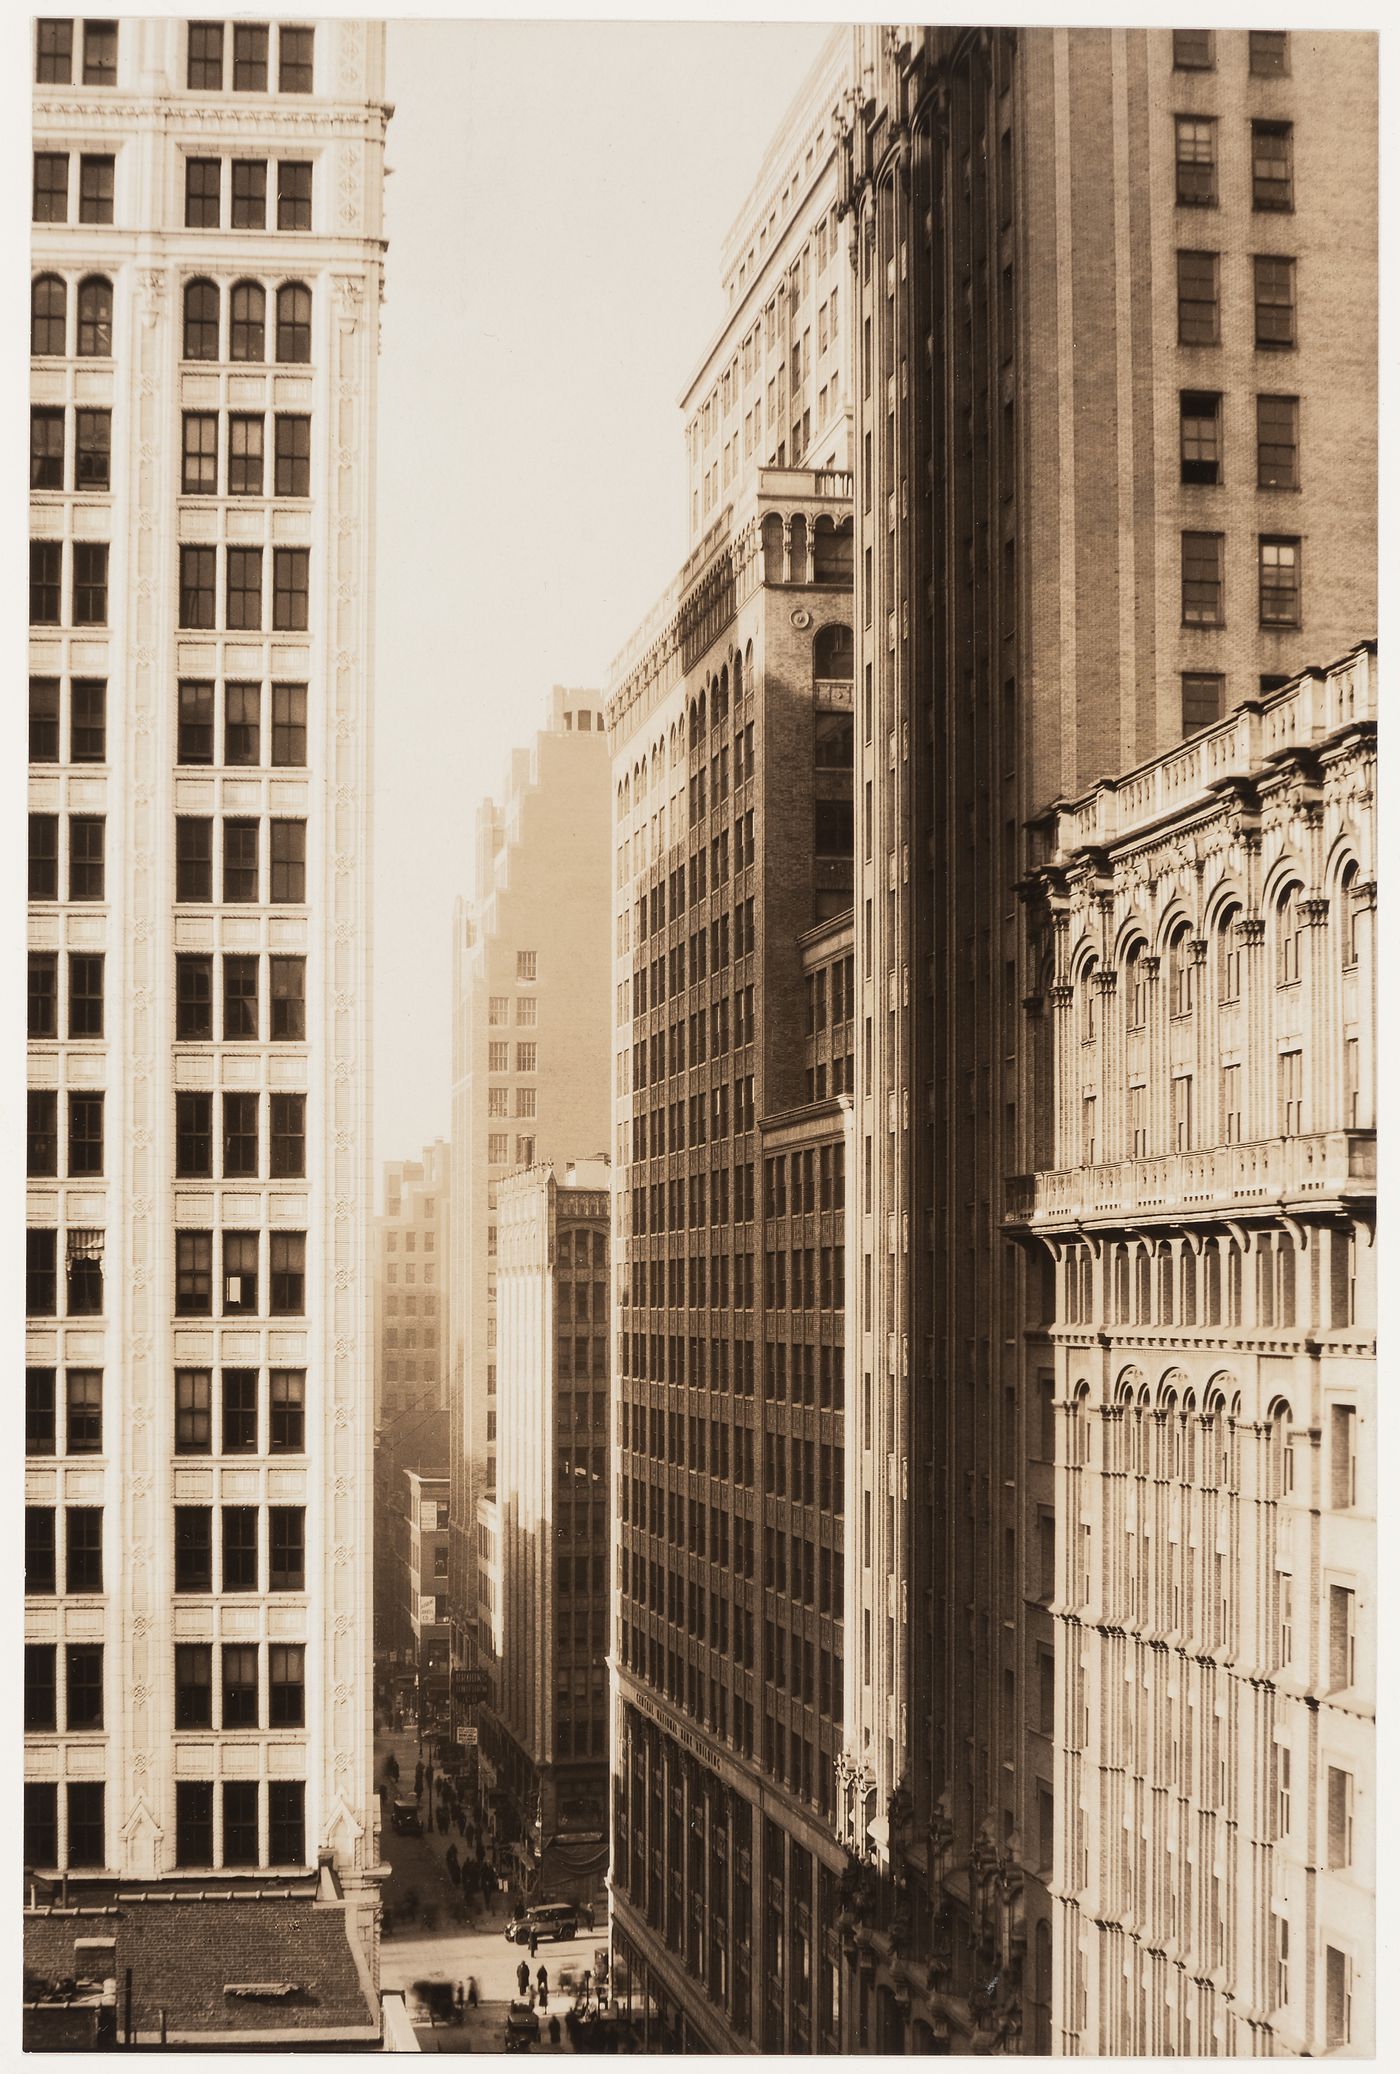 View from above buildings on Fortieth street, looking west, New York City, New York